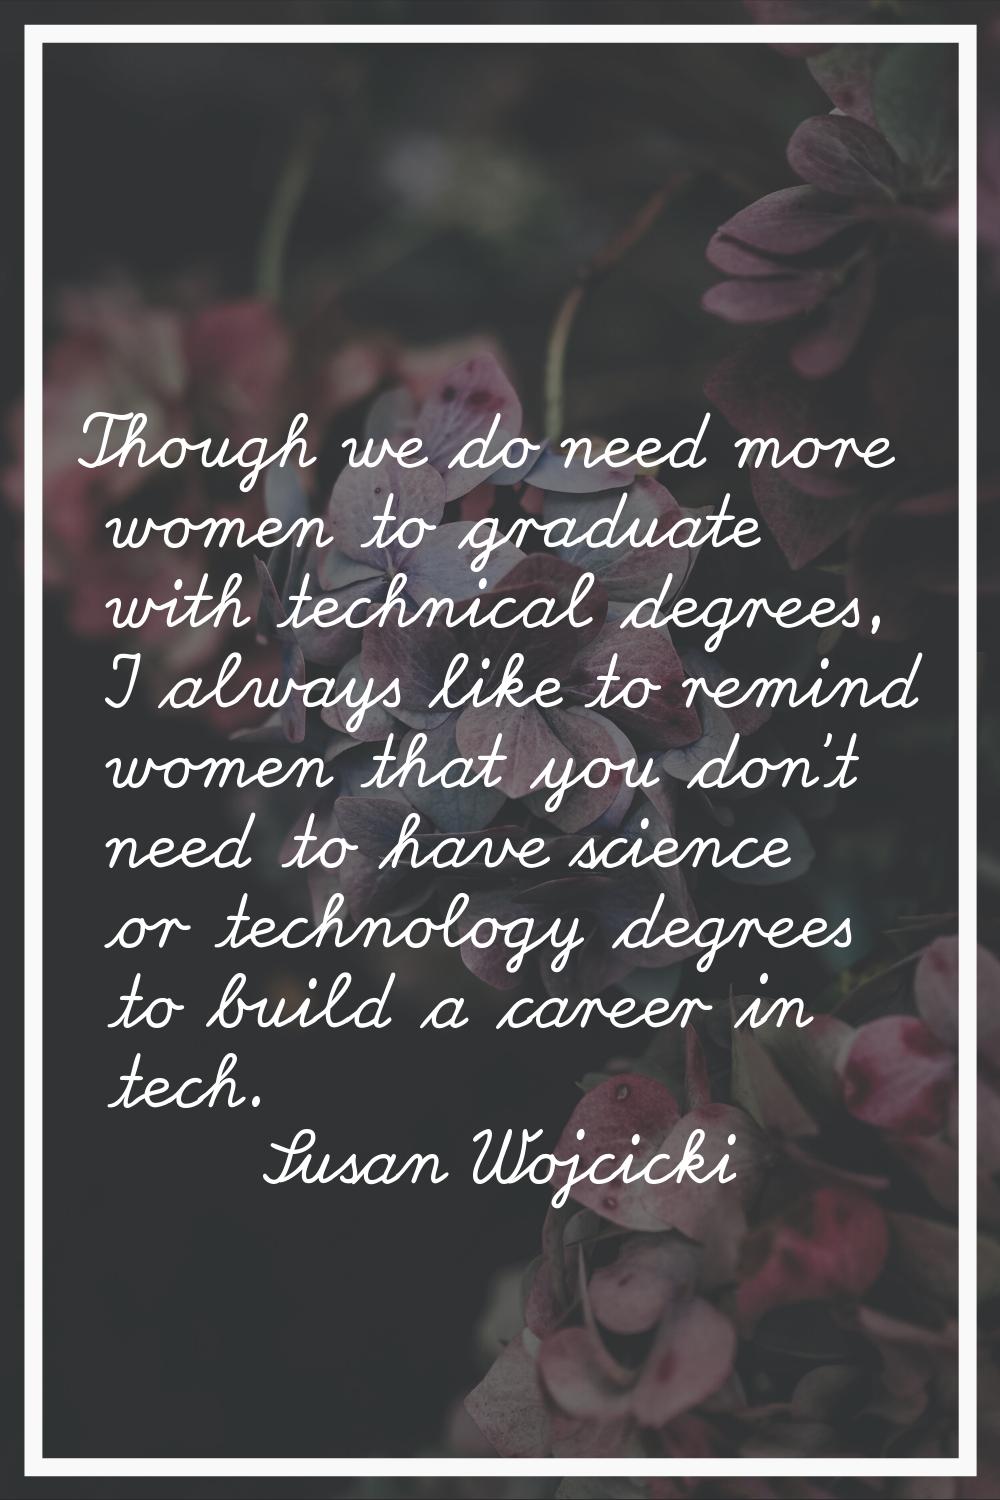 Though we do need more women to graduate with technical degrees, I always like to remind women that